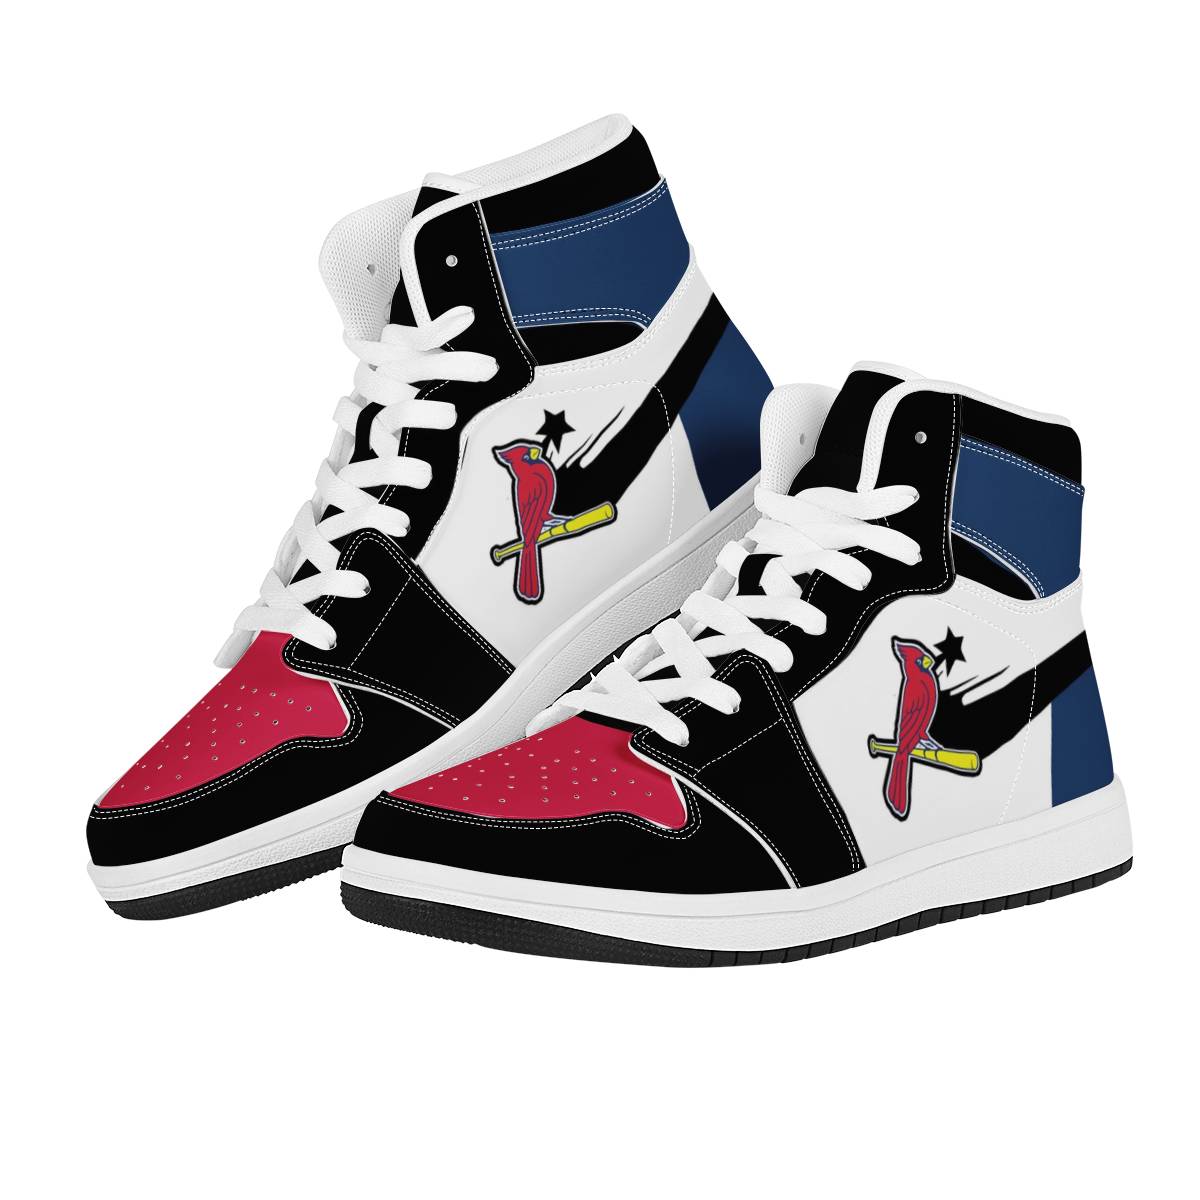 Women's St. Louis Cardinals High Top Leather AJ1 Sneakers 001